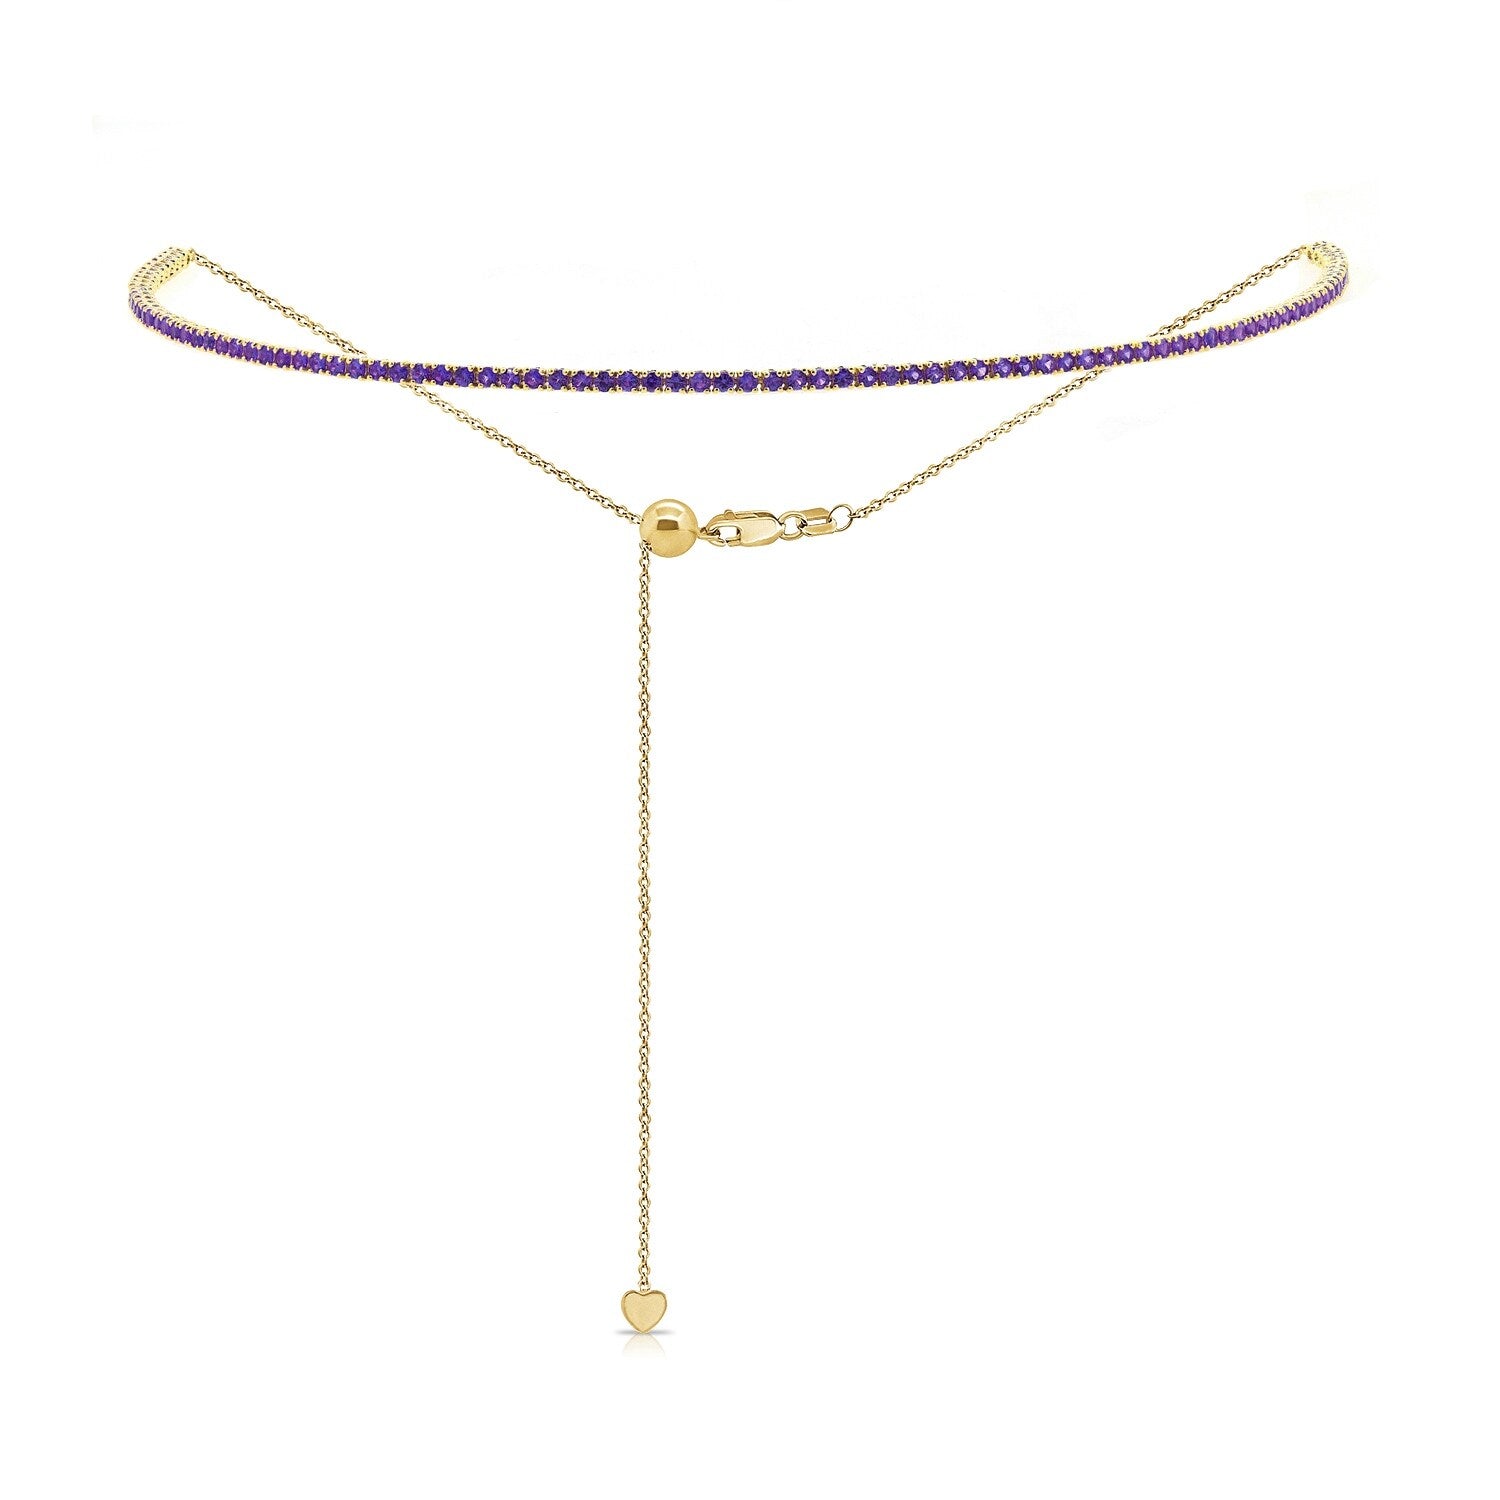 Joelle Sapphire 2.62ct Line Choker Necklace 14K Yellow Gold for Her Ad ...